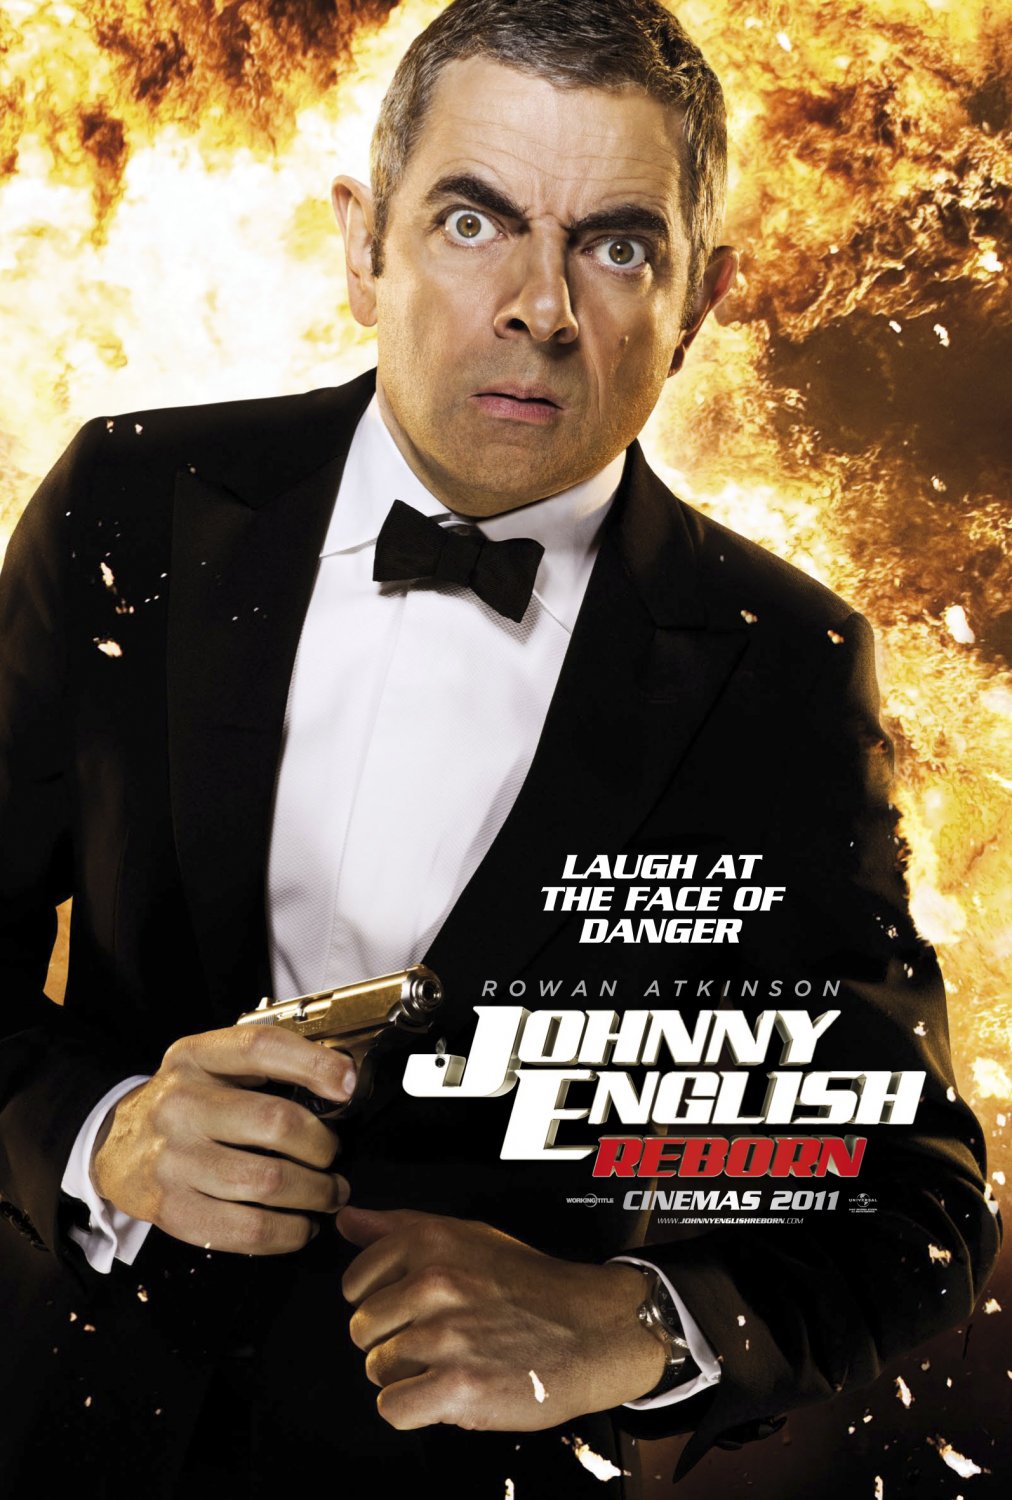 Extra Large Movie Poster Image for Johnny English Reborn (#2 of 5)